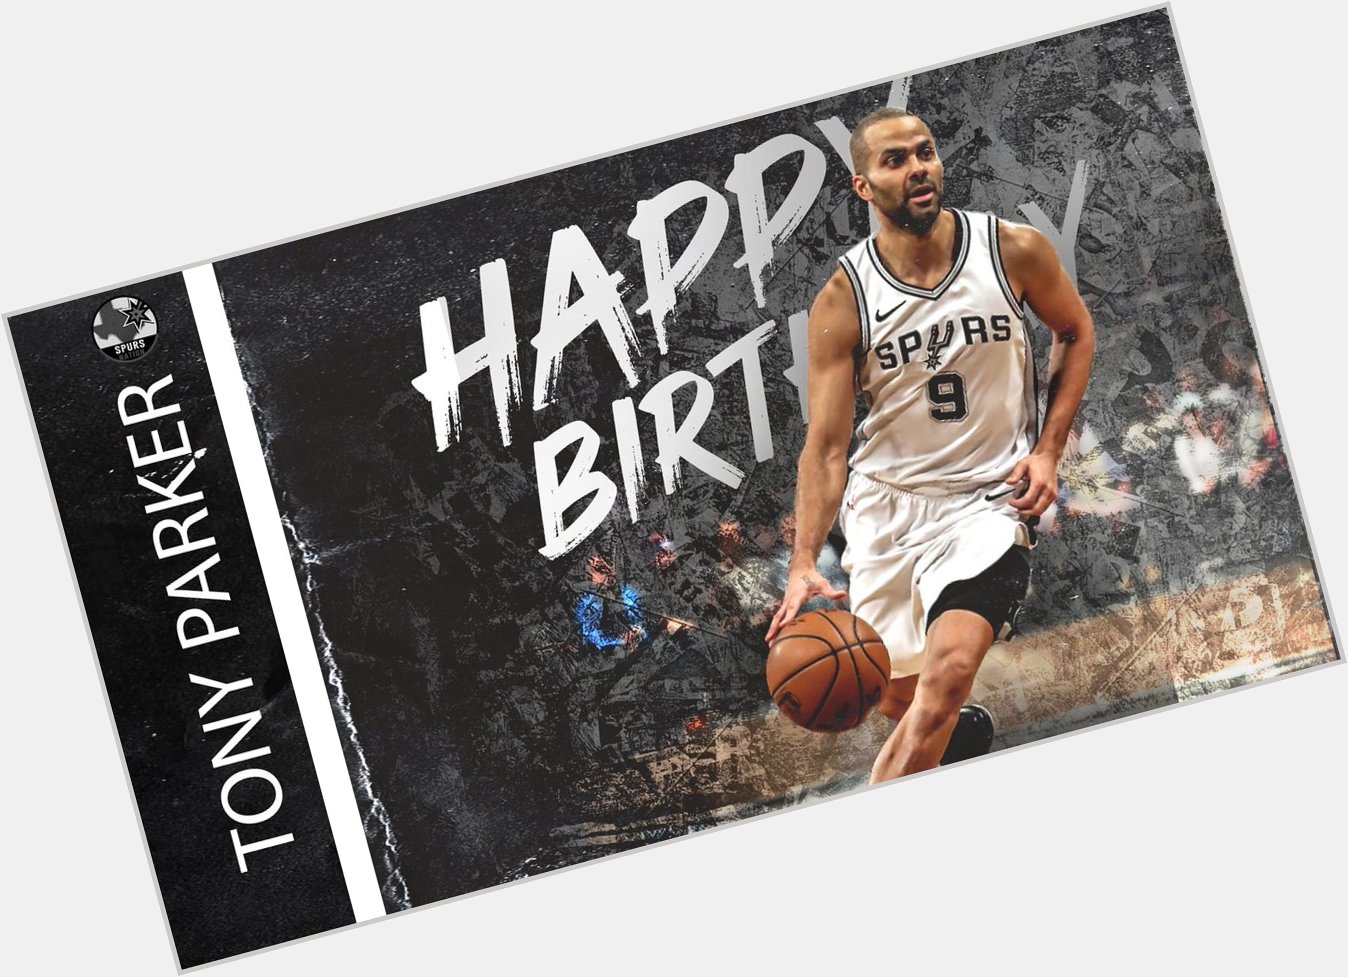 Join Spurs Nation in wishing Tony Parker a happy 38th birthday 